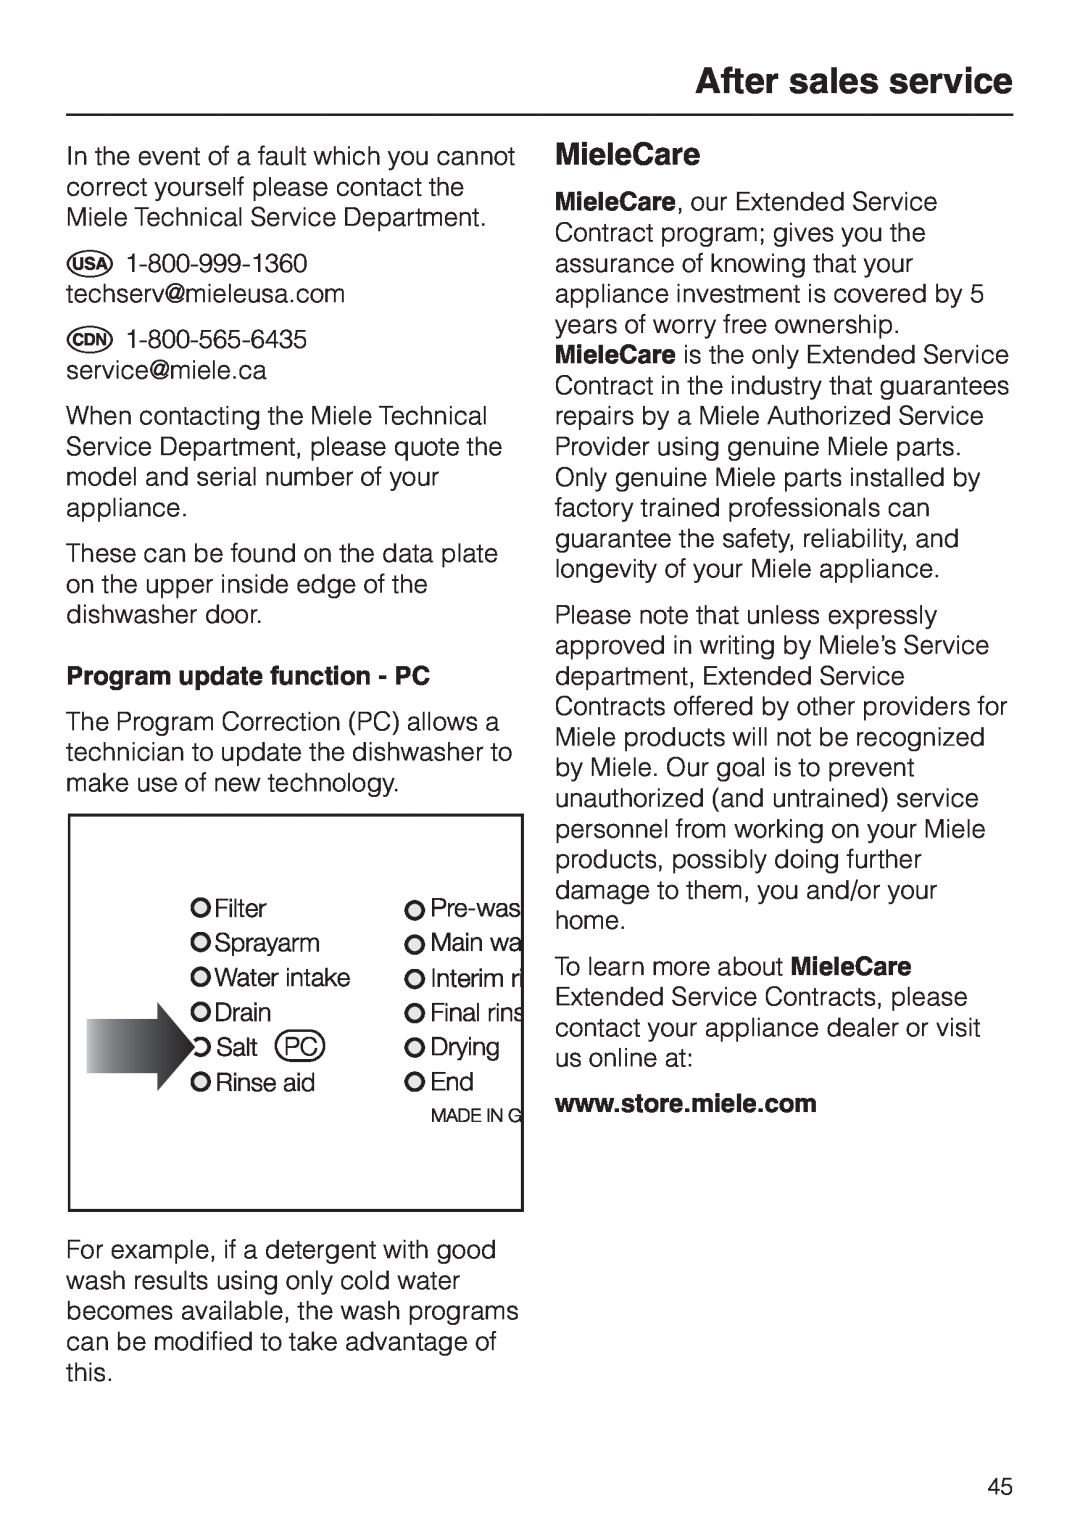 Miele HG01 operating instructions After sales service, MieleCare, Program update function - PC 